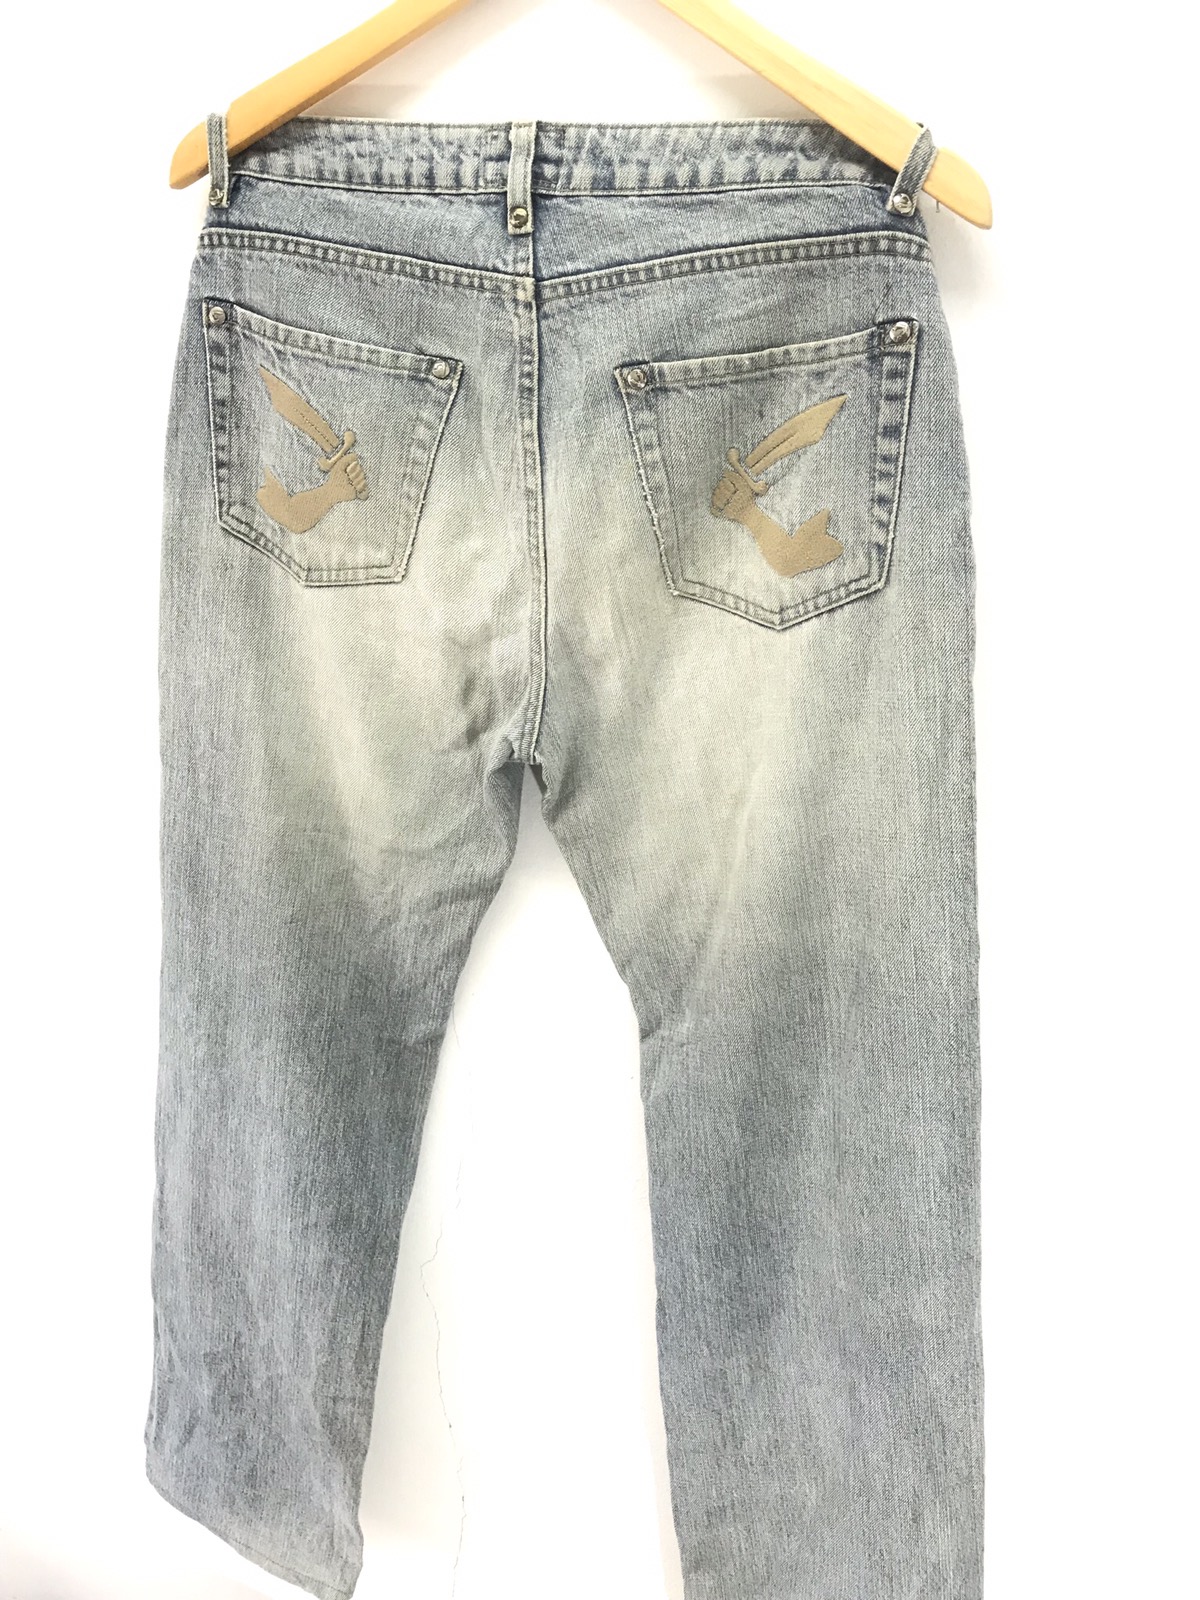 🔥Vivienne Westwood Anglomania Faded Session Jean - 2